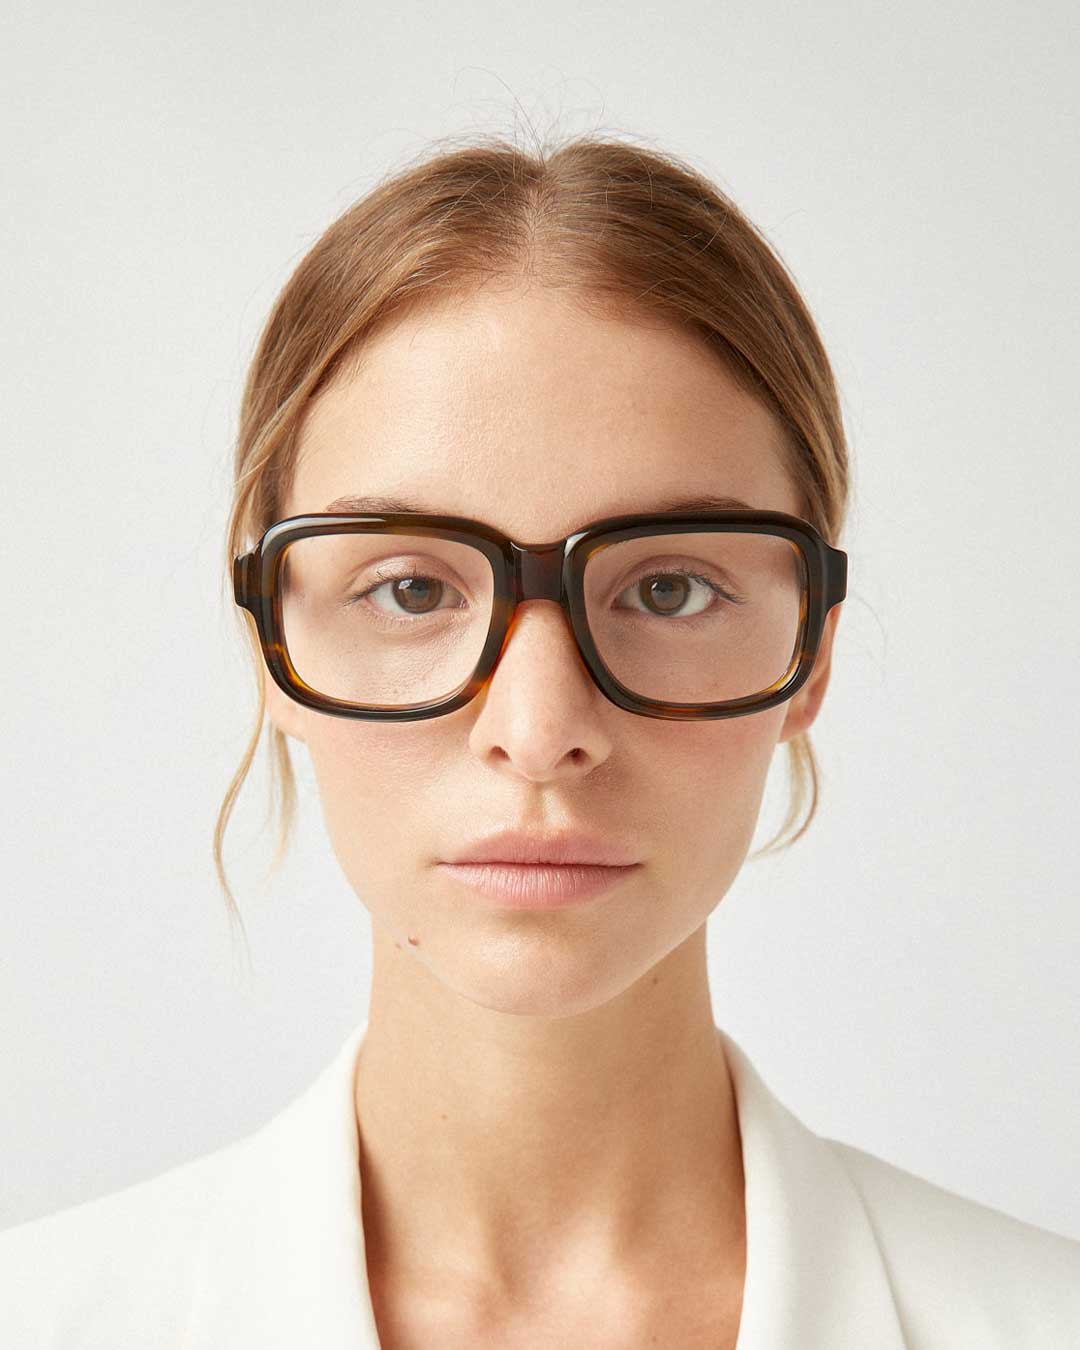 Young woman wearing very thick oversized spectacles